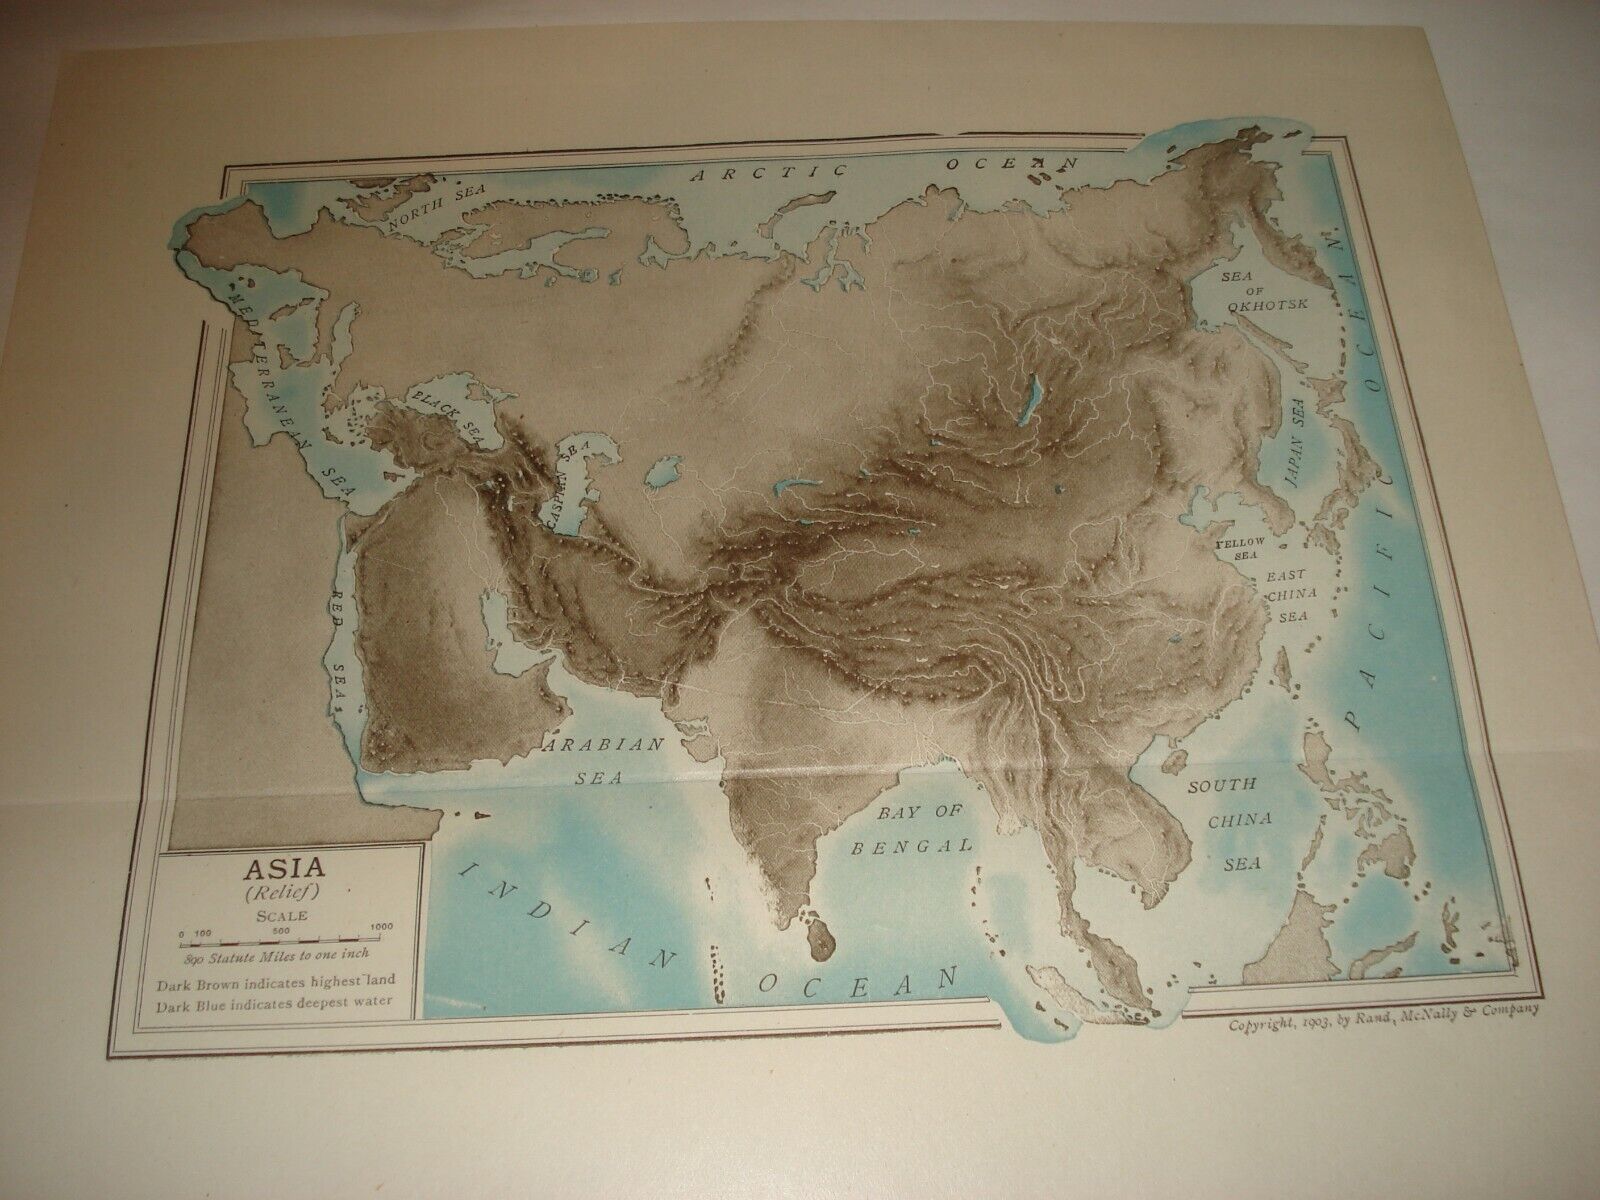 Lot of 5 Antique Maps 1903 1904  Asia Colorful Map Relief Rand McNally Без бренда - фотография #8